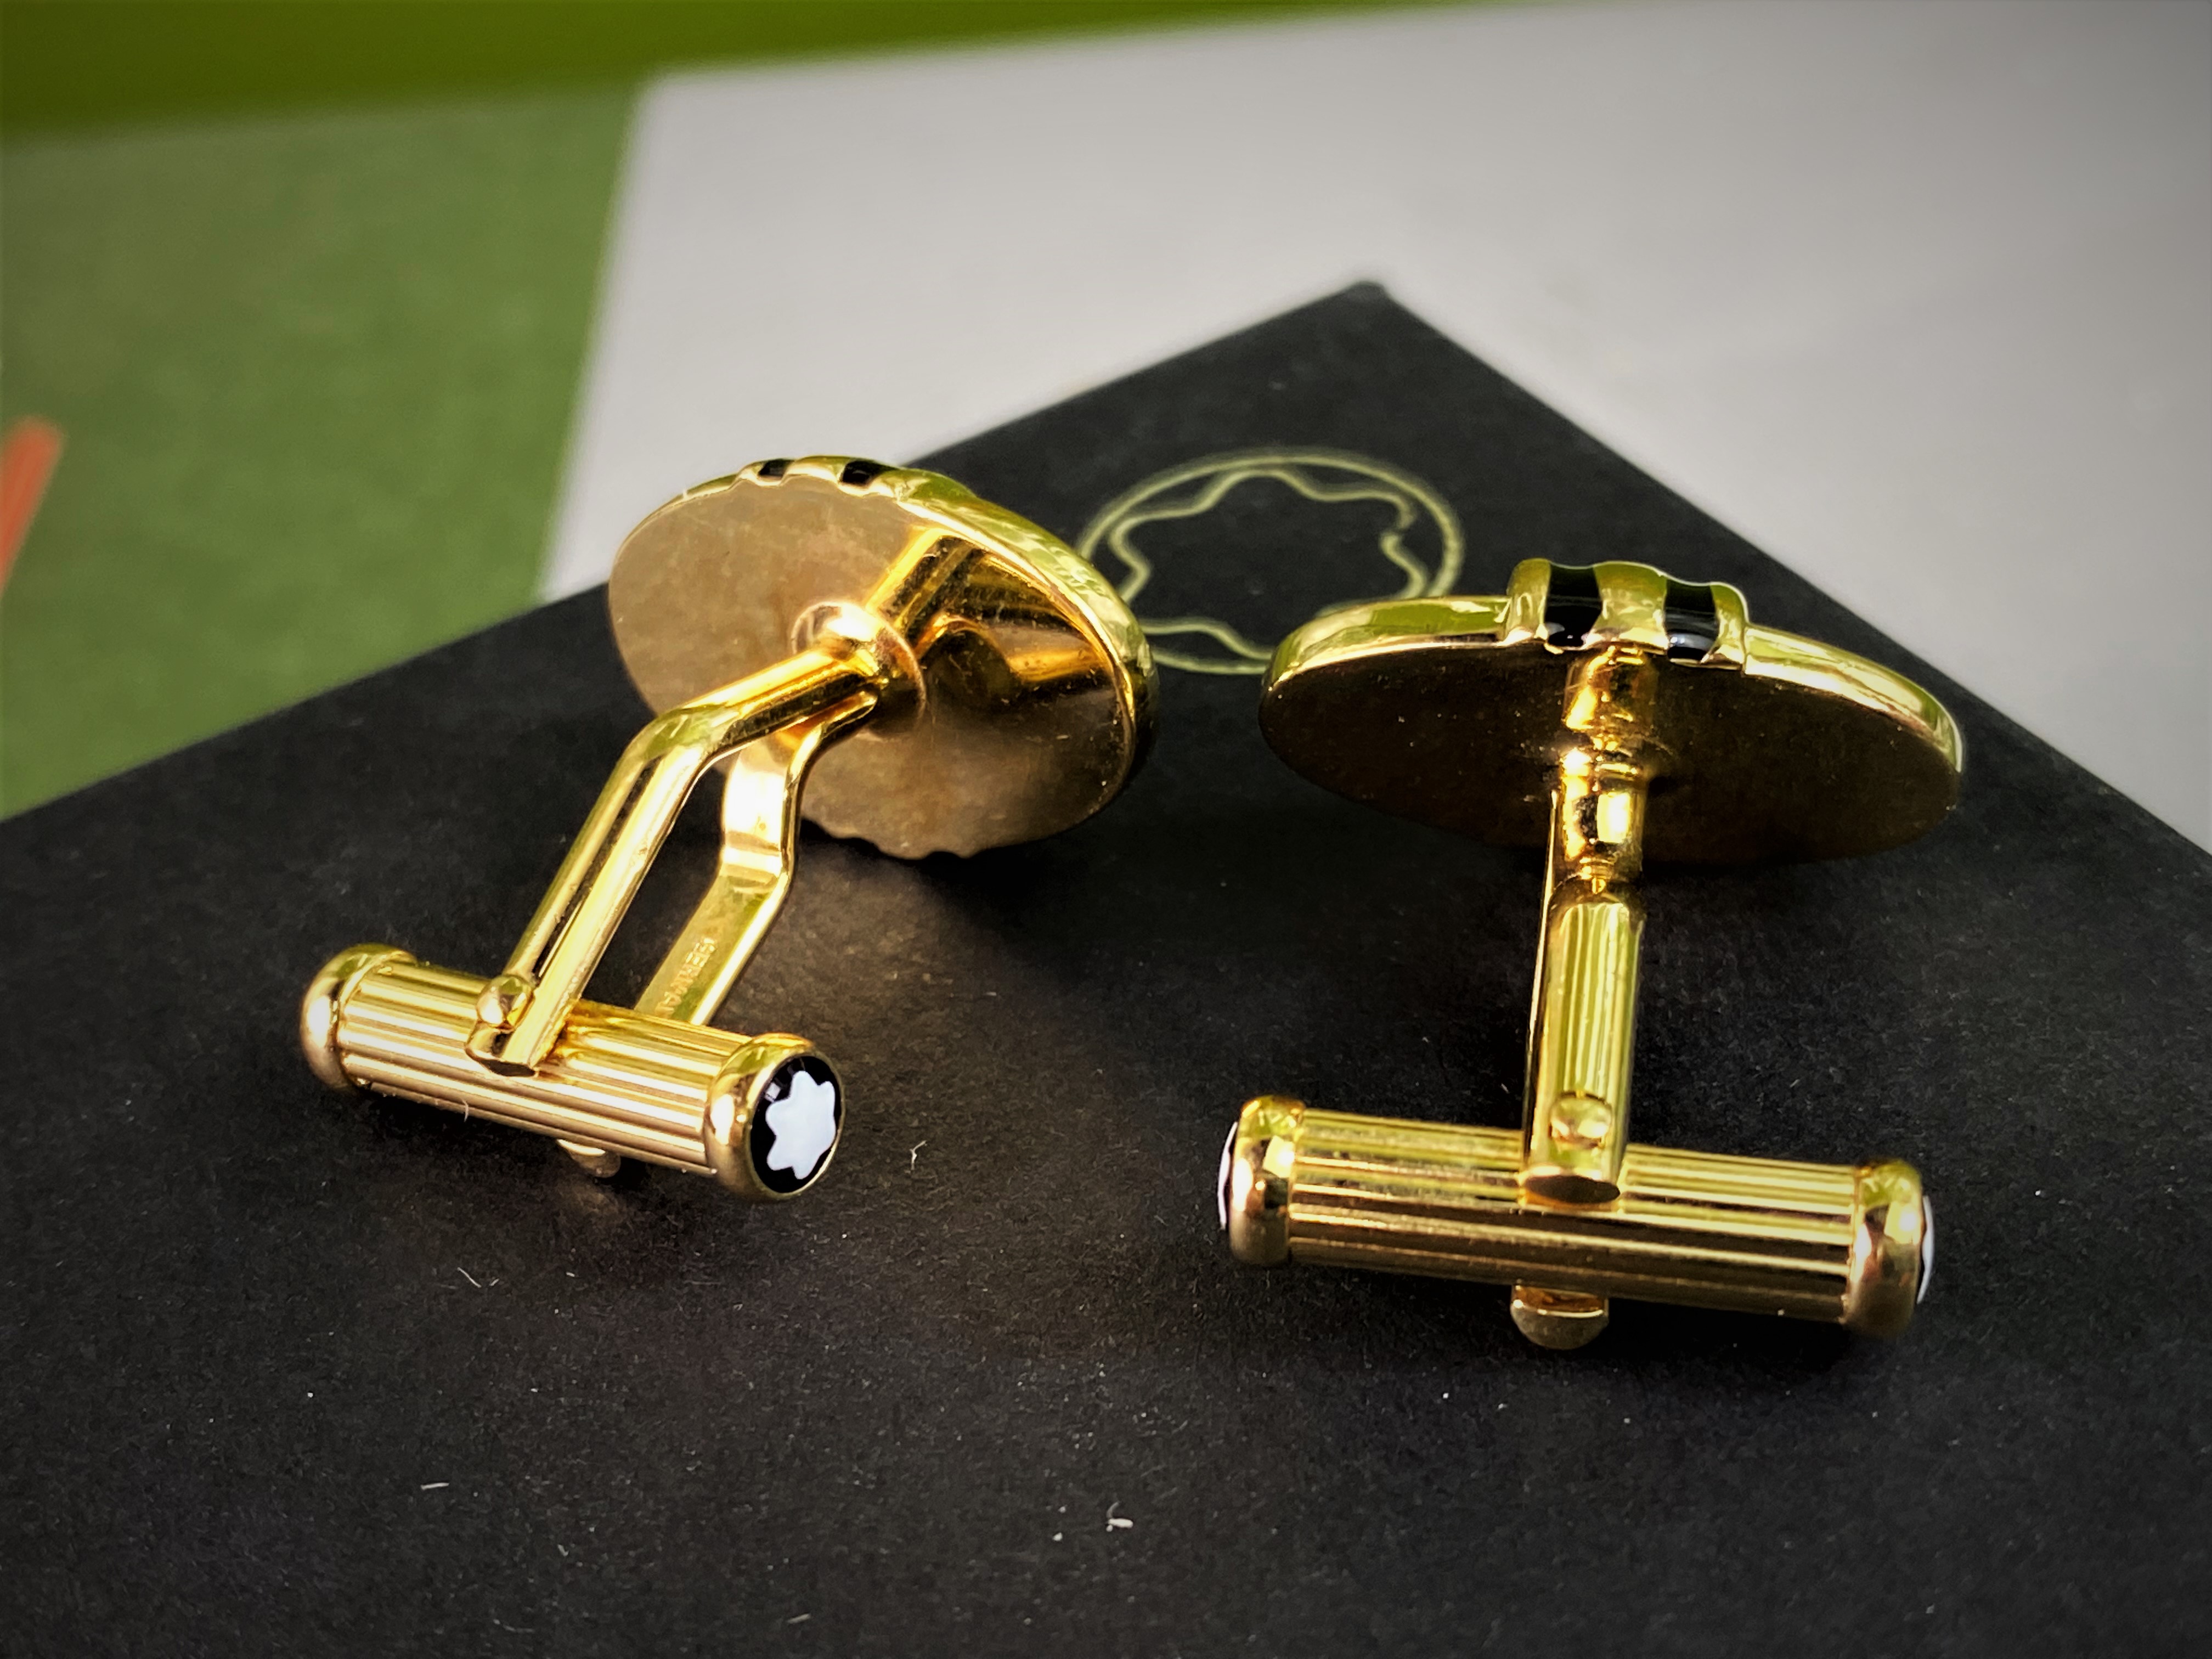 Montblanc Pair of Classic Gold Plated Cufflinks - Image 3 of 4